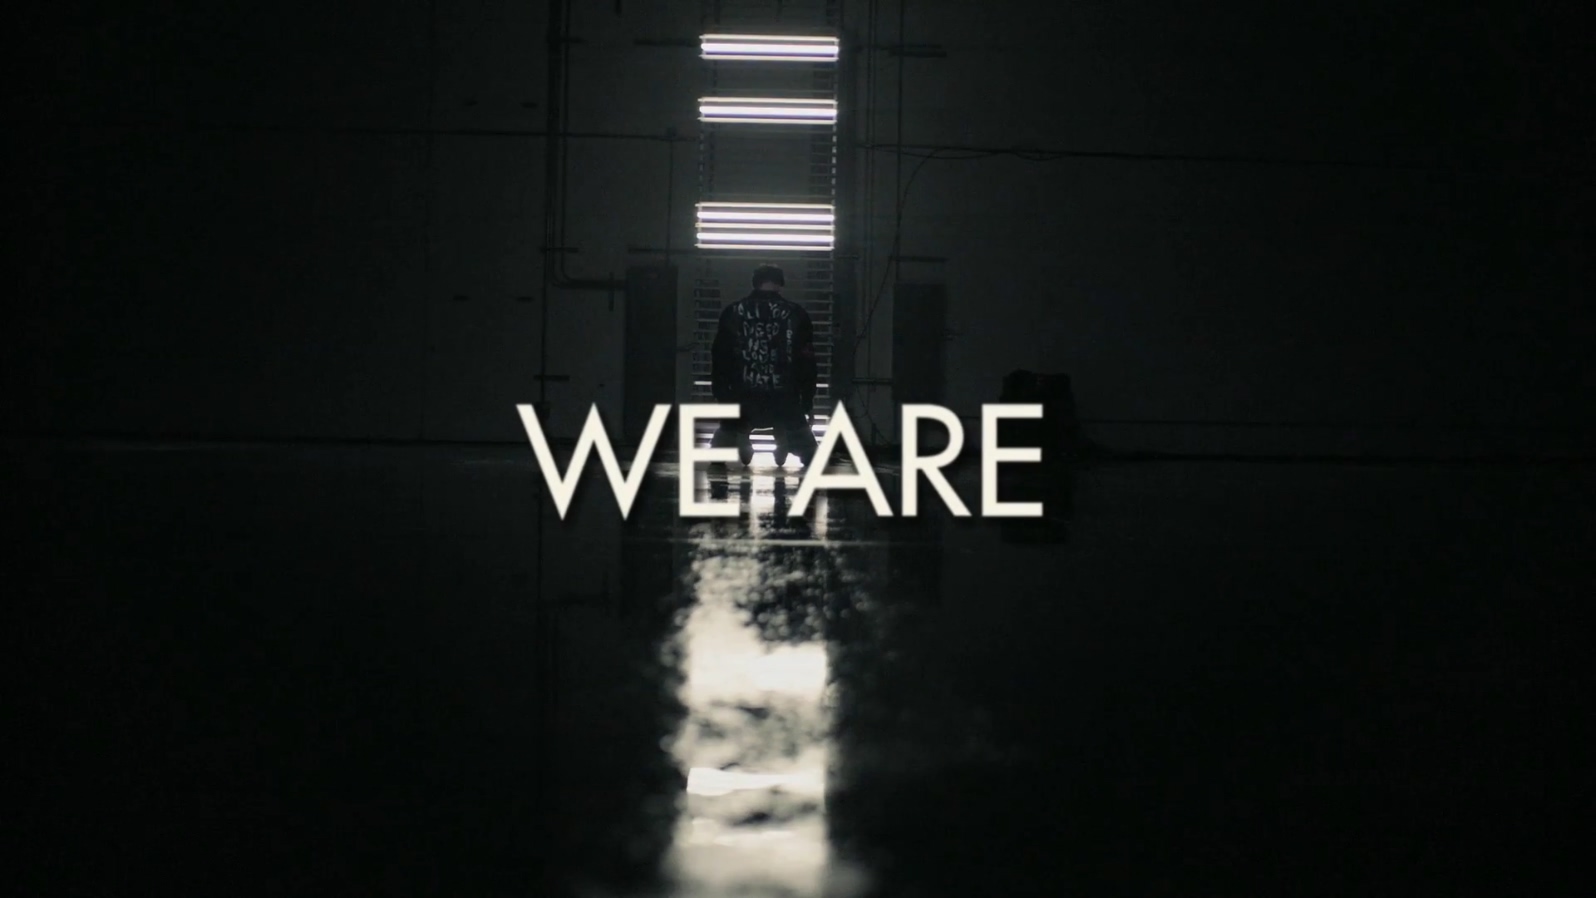 ONE OK ROCK 《We are》 (Japanese Ver.) 1080P